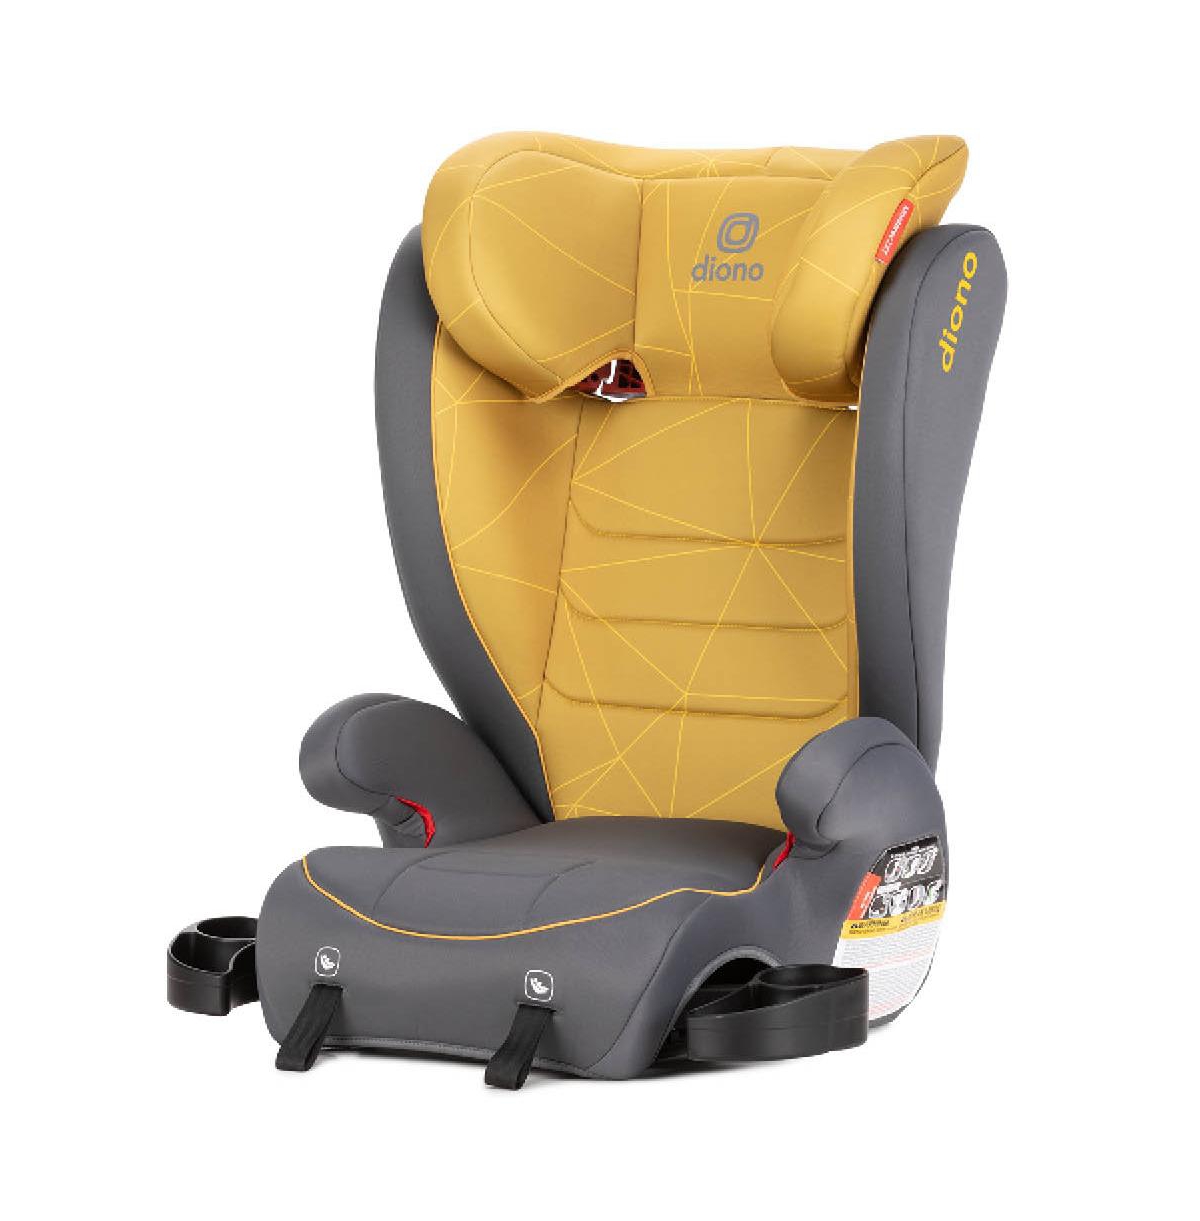 Diono Monterey 2xt Latch 2-in-1 Booster Car Seat In Yellow